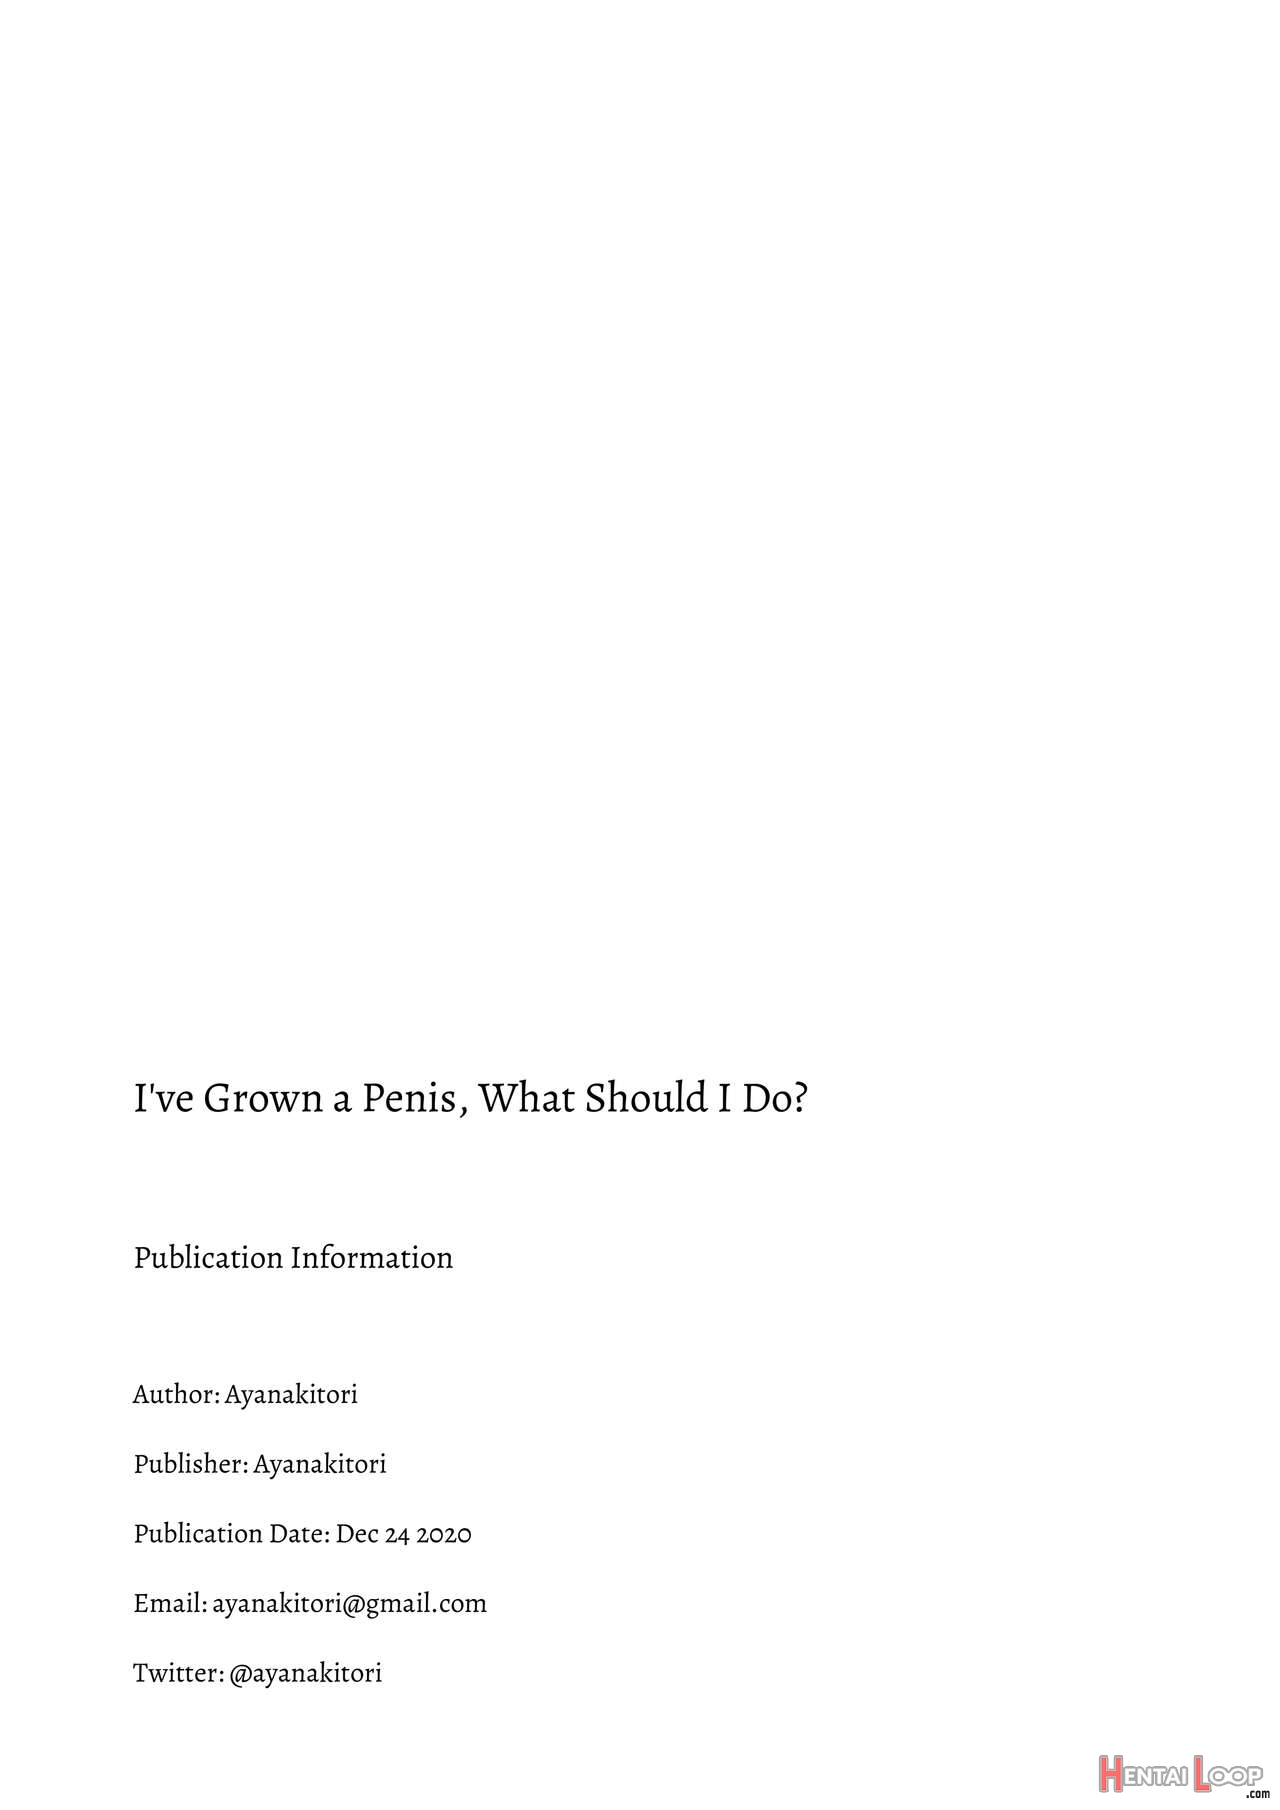 I’ve Grown A Penis, What Should I Do? page 71